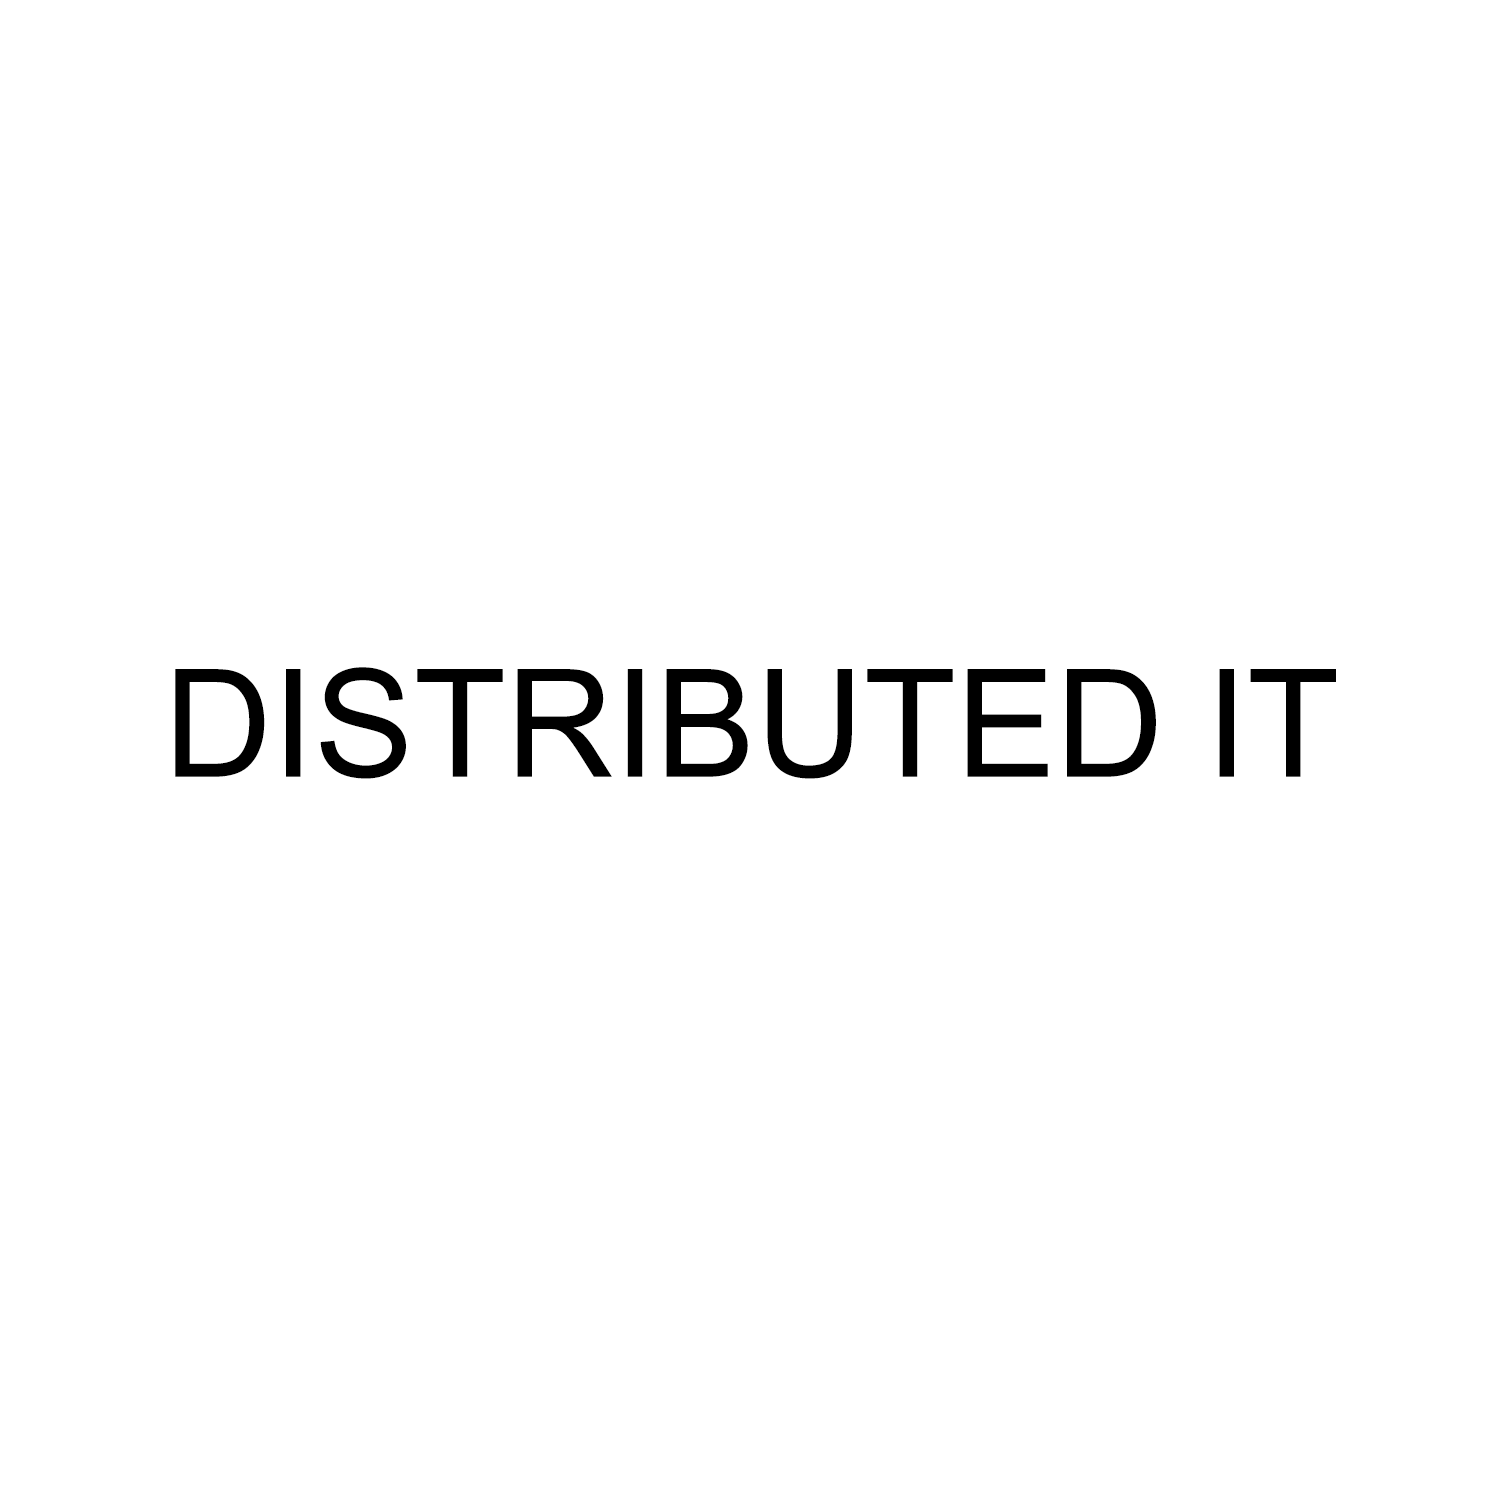 Distributed IT button